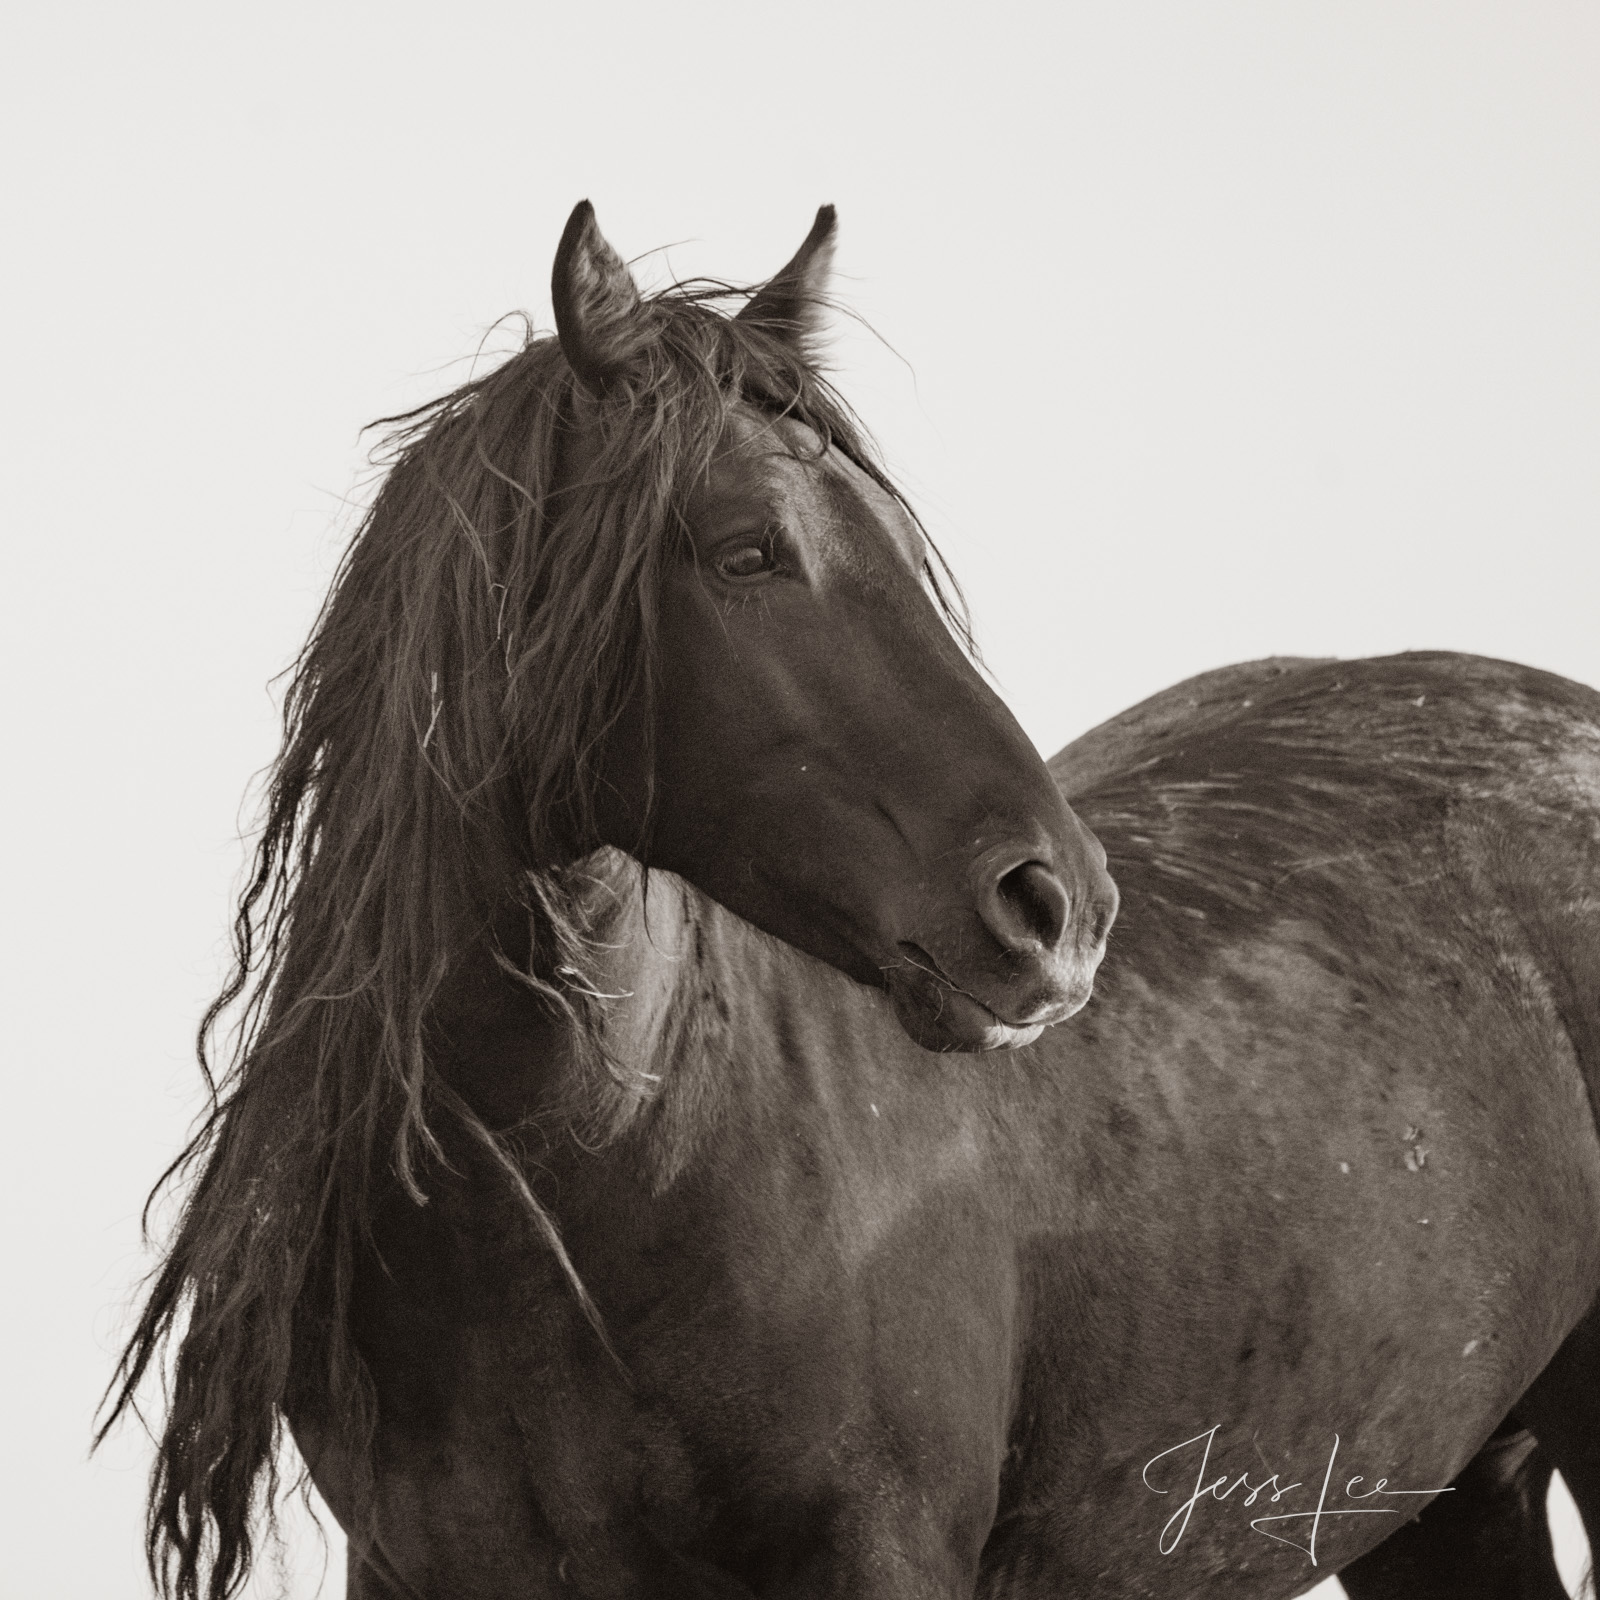 Fine Art Print of Wyoming Wild Mustang Stallion #1. Limited Edition of 250 Luxurious Prints.  Choose the style, size, and medium...